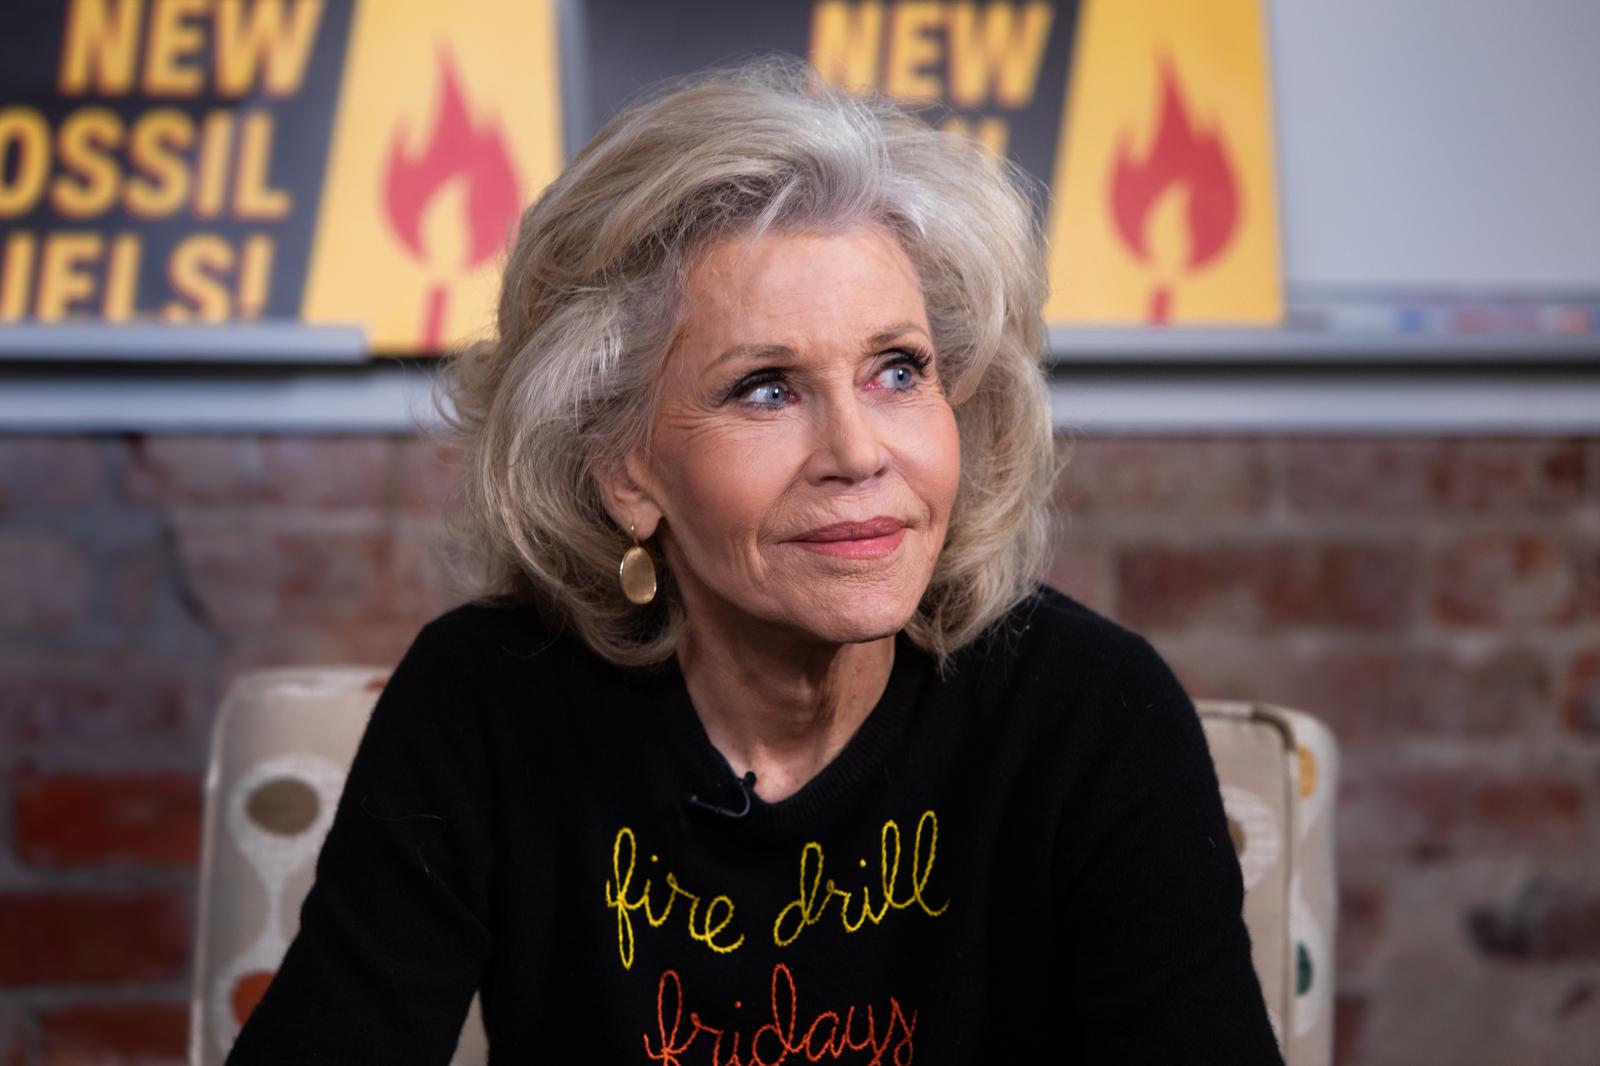 WASHINGTON, DC - JANUARY 2nd: Actress Jane Fonda while hosting a panel titled "Fire Drill Friday" to discuss Climate Change consequences with environmental activists in Washington, DC. The actress launched "Fire Drill Friday" to demand Immediate Action for a Green New Deal. Clean renewable energy by 2030, and no new exploration or drilling for Fossil Fuels DC USA